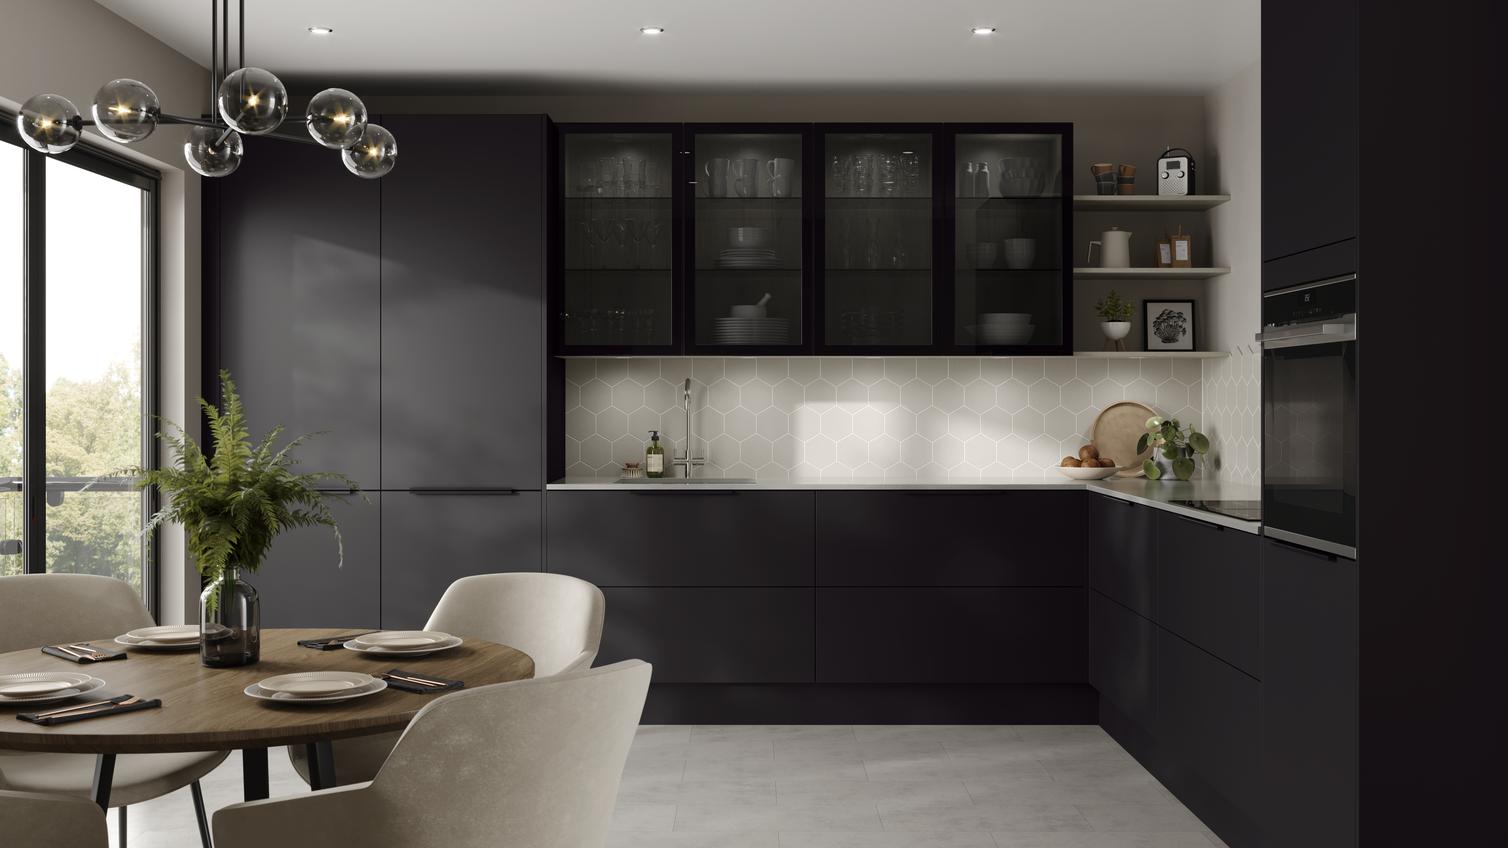 L-shape black kitchen idea with super-matt slab doors, glass wall cabinets above a white worktop, and a chrome kitchen tap.